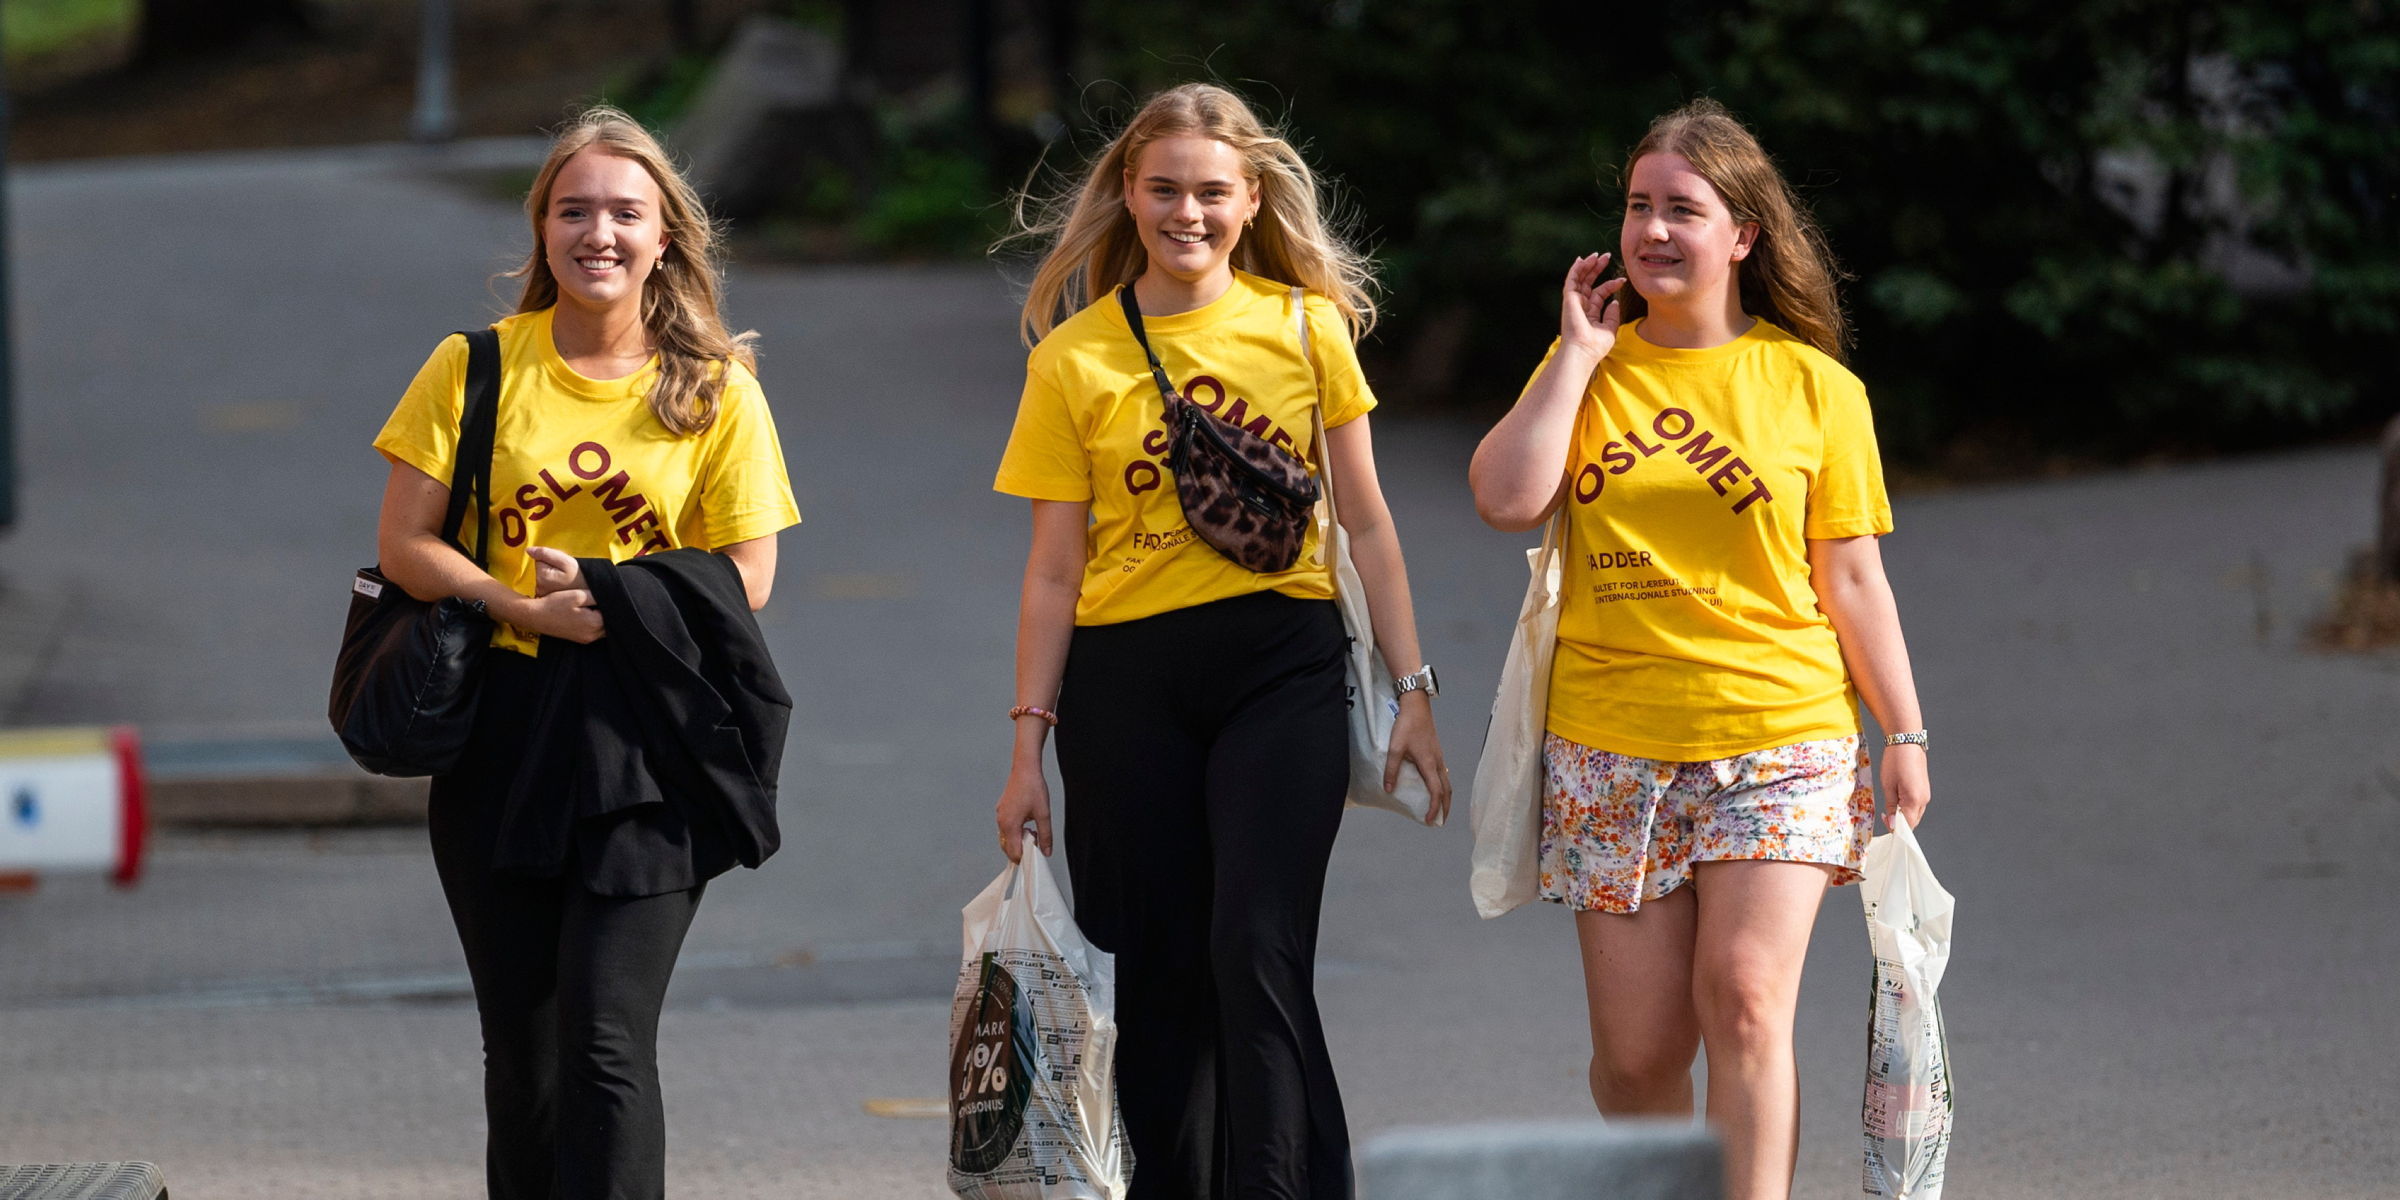 Three OsloMet students in yellow t-shirts come walking while smiling.